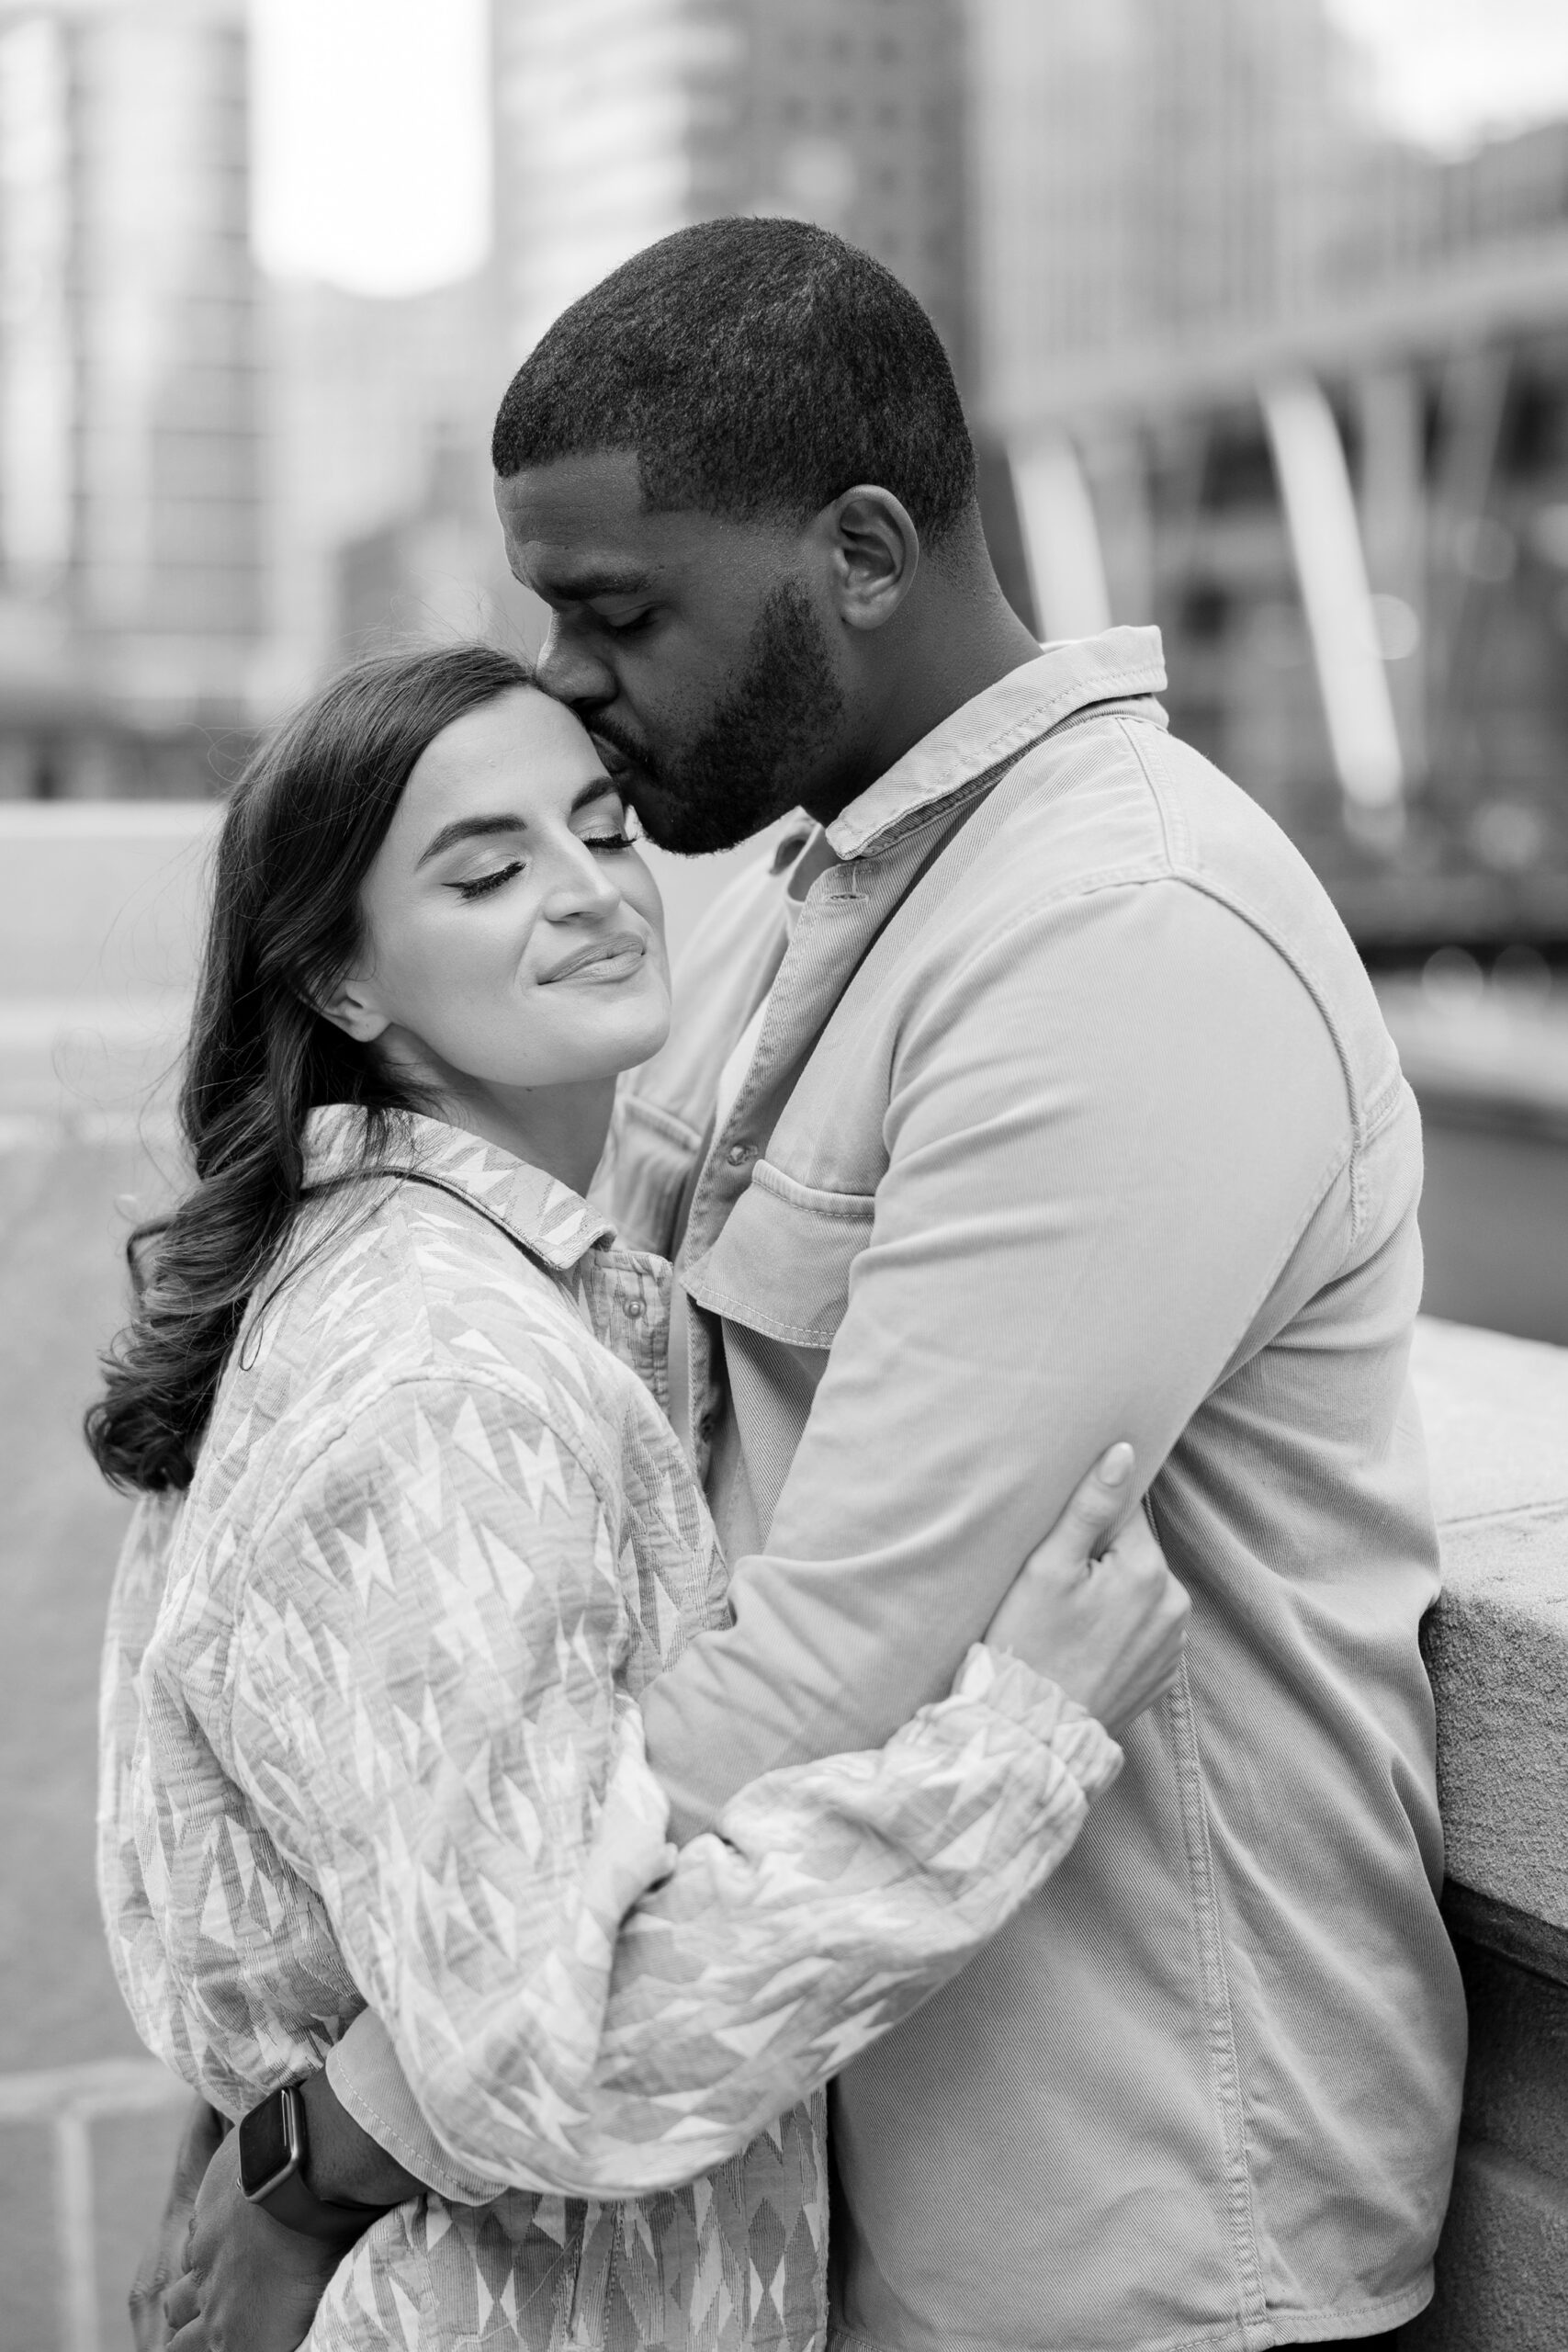 Man kisses woman on the forehead during Downtown Chicago engagement photos